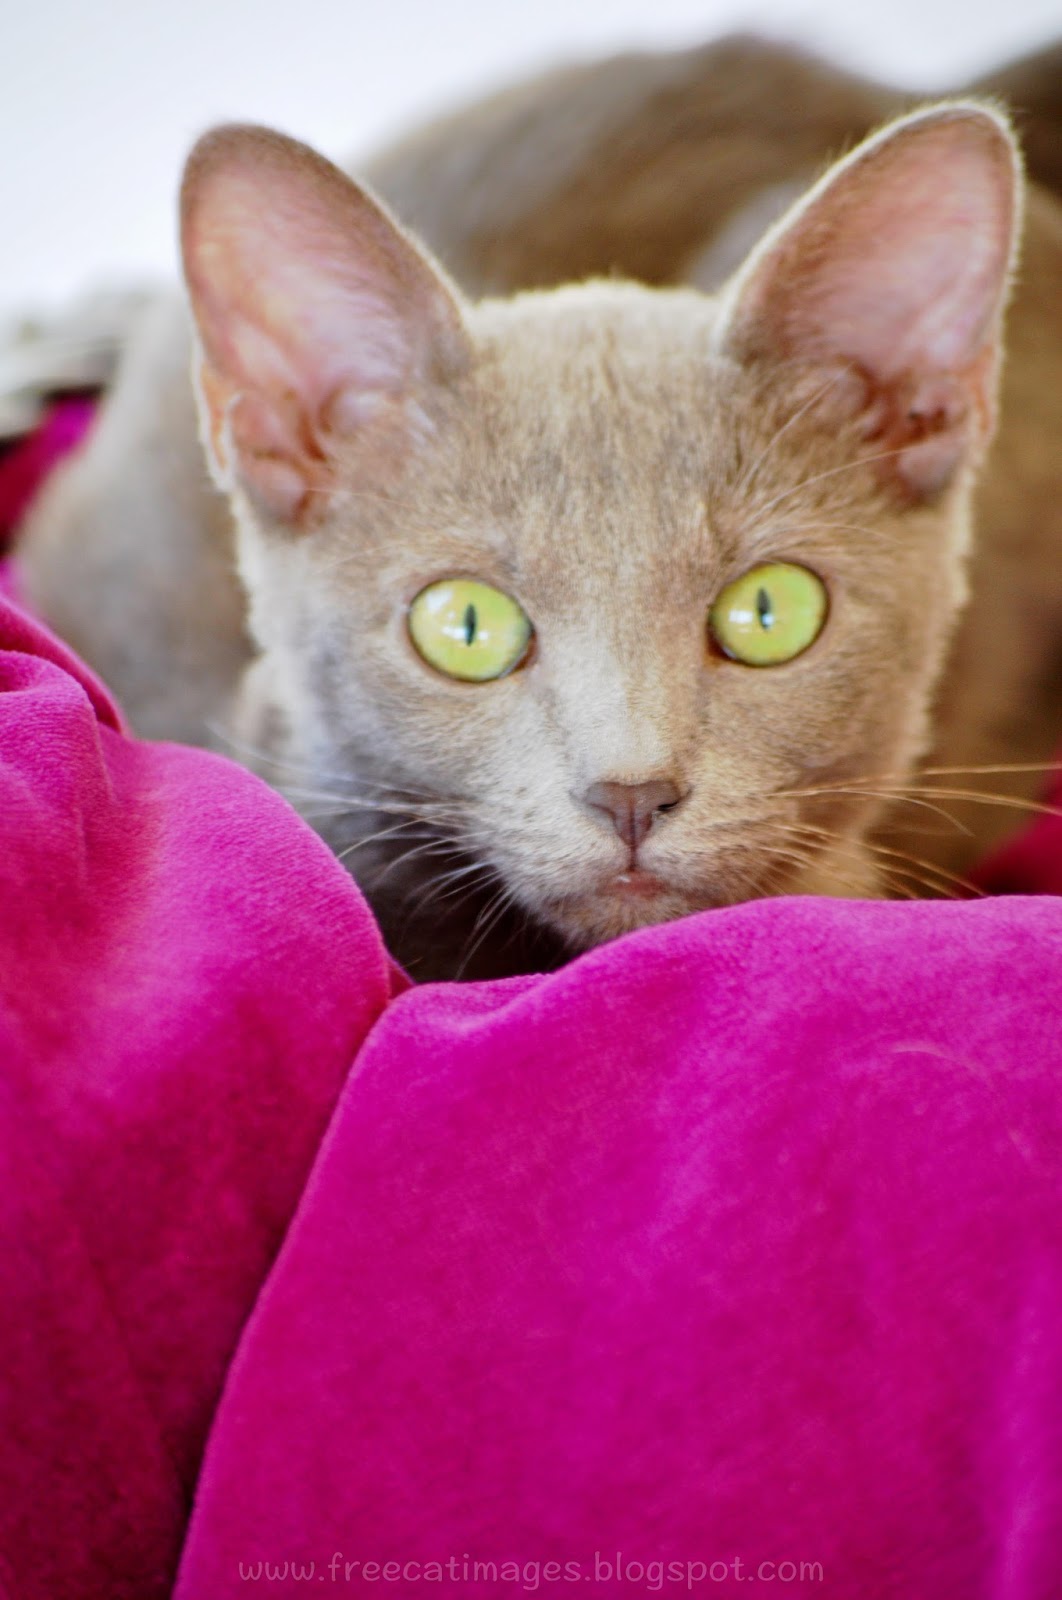 Free Cat Images: Free lilac cat picture - look me in the eyes - freebie